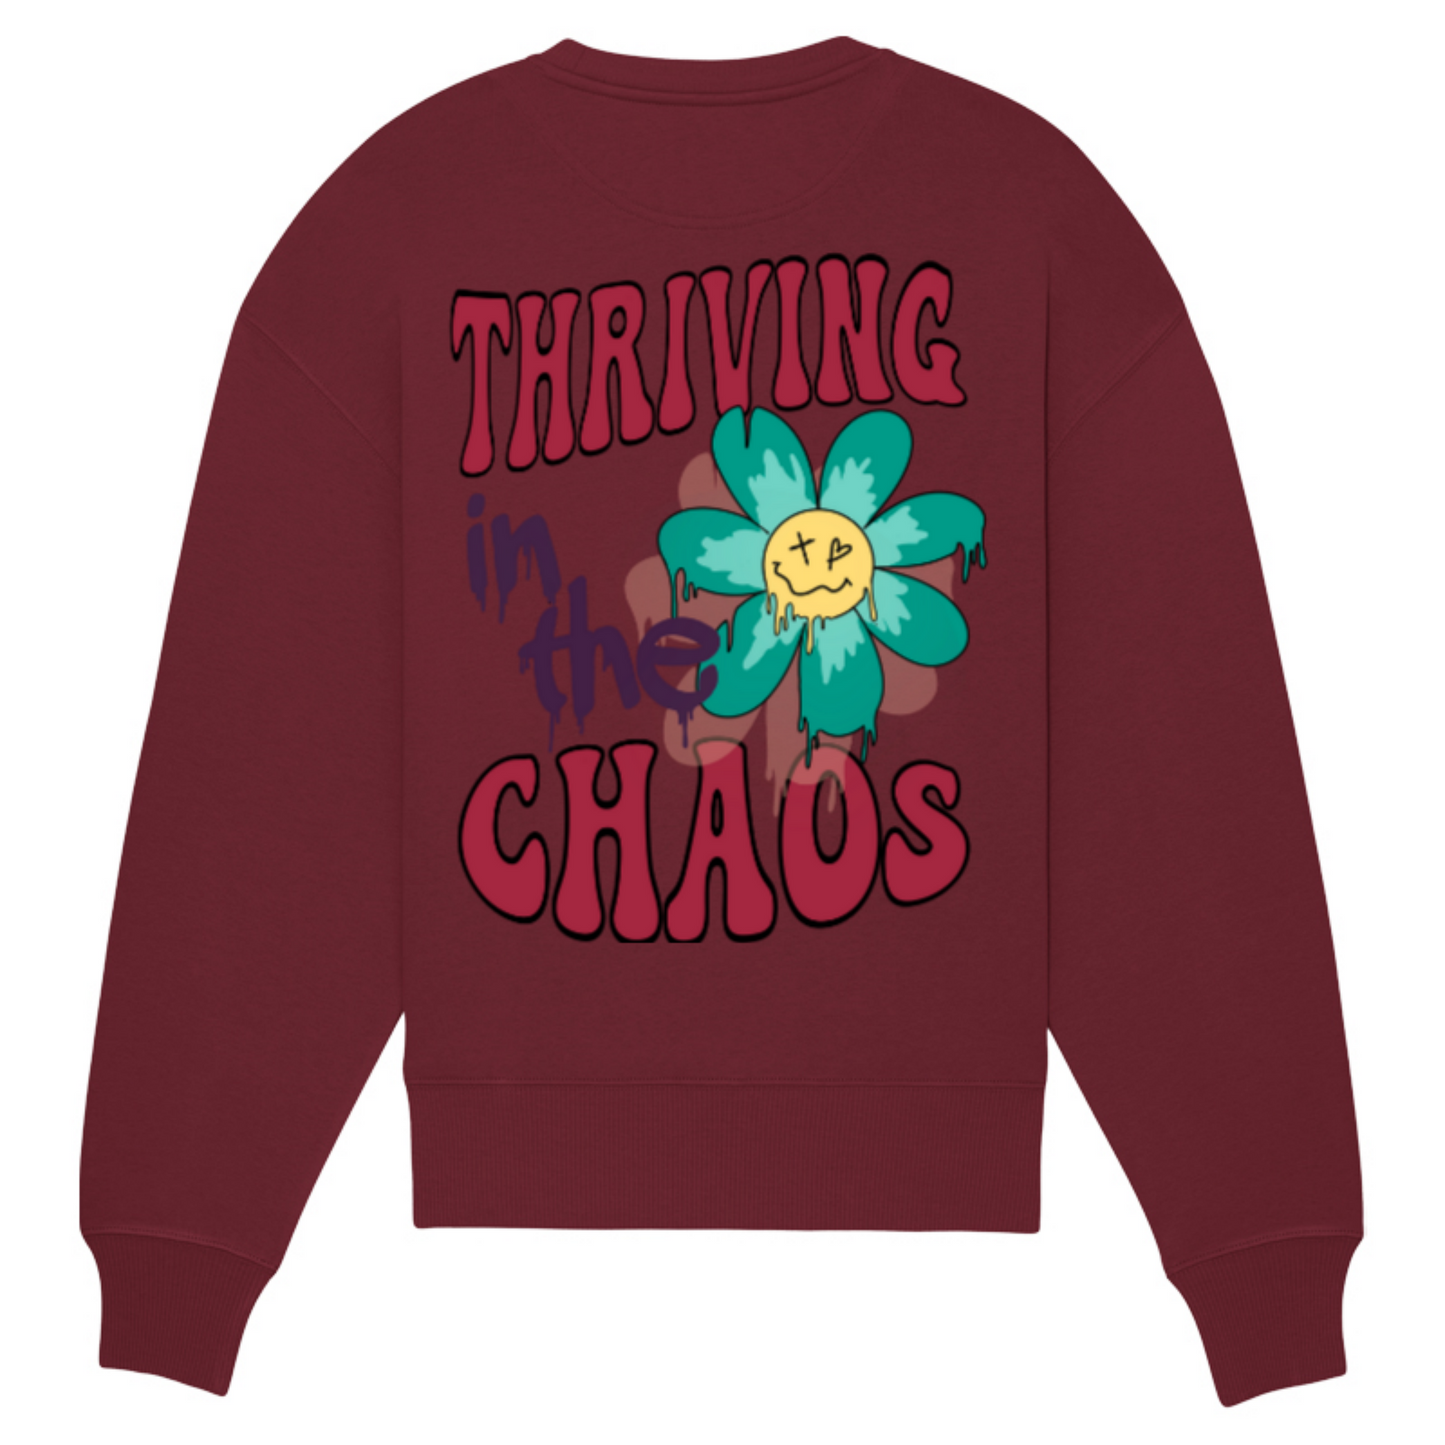 Thriving in the Chaos Oversize Sweater